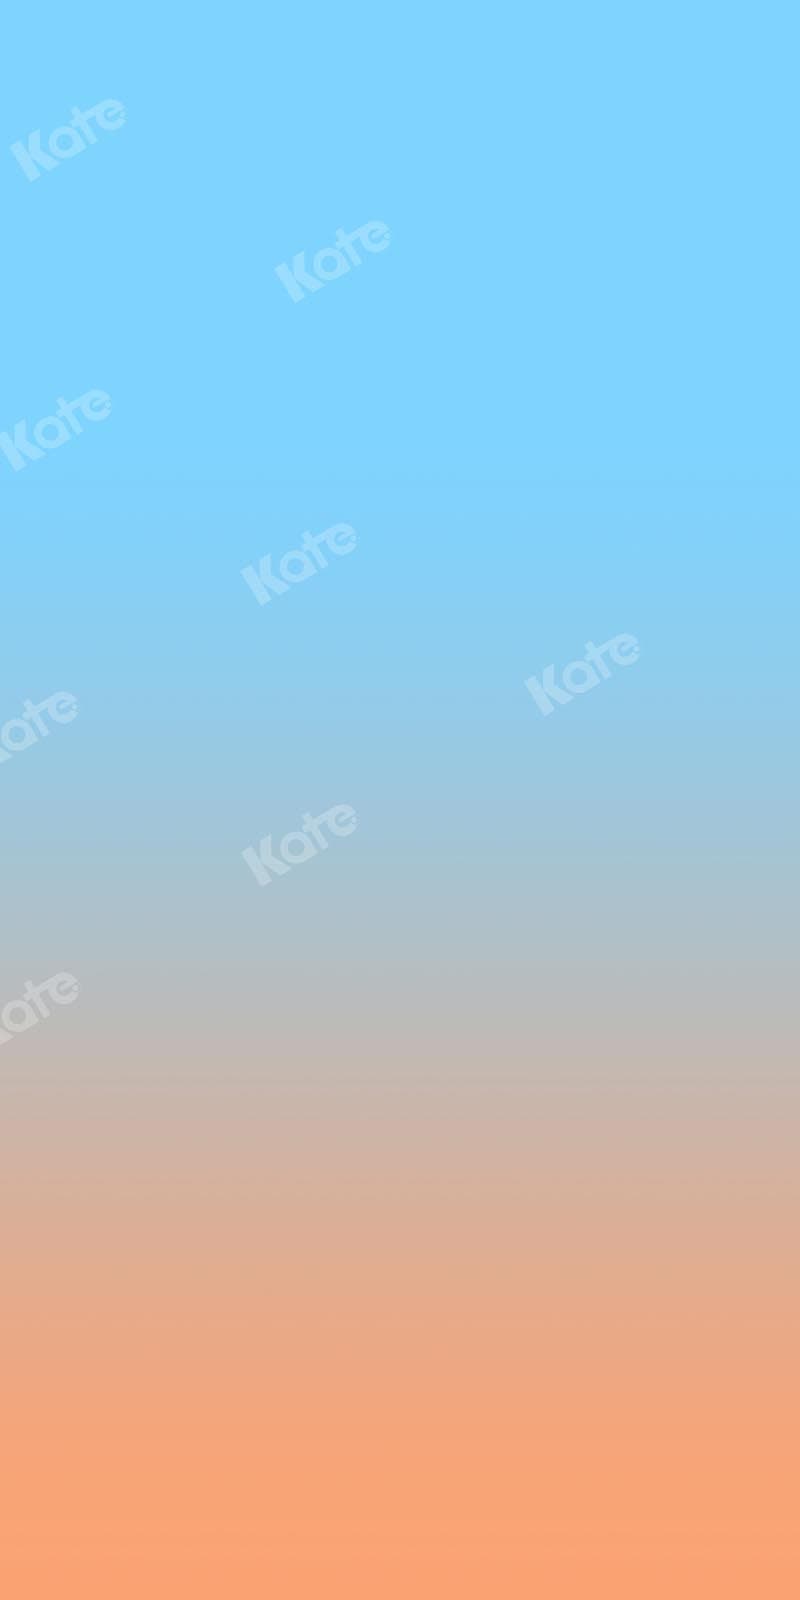 Kate Abstract Baby Blue Gradient Orange Backdrop Designed by Kate Image